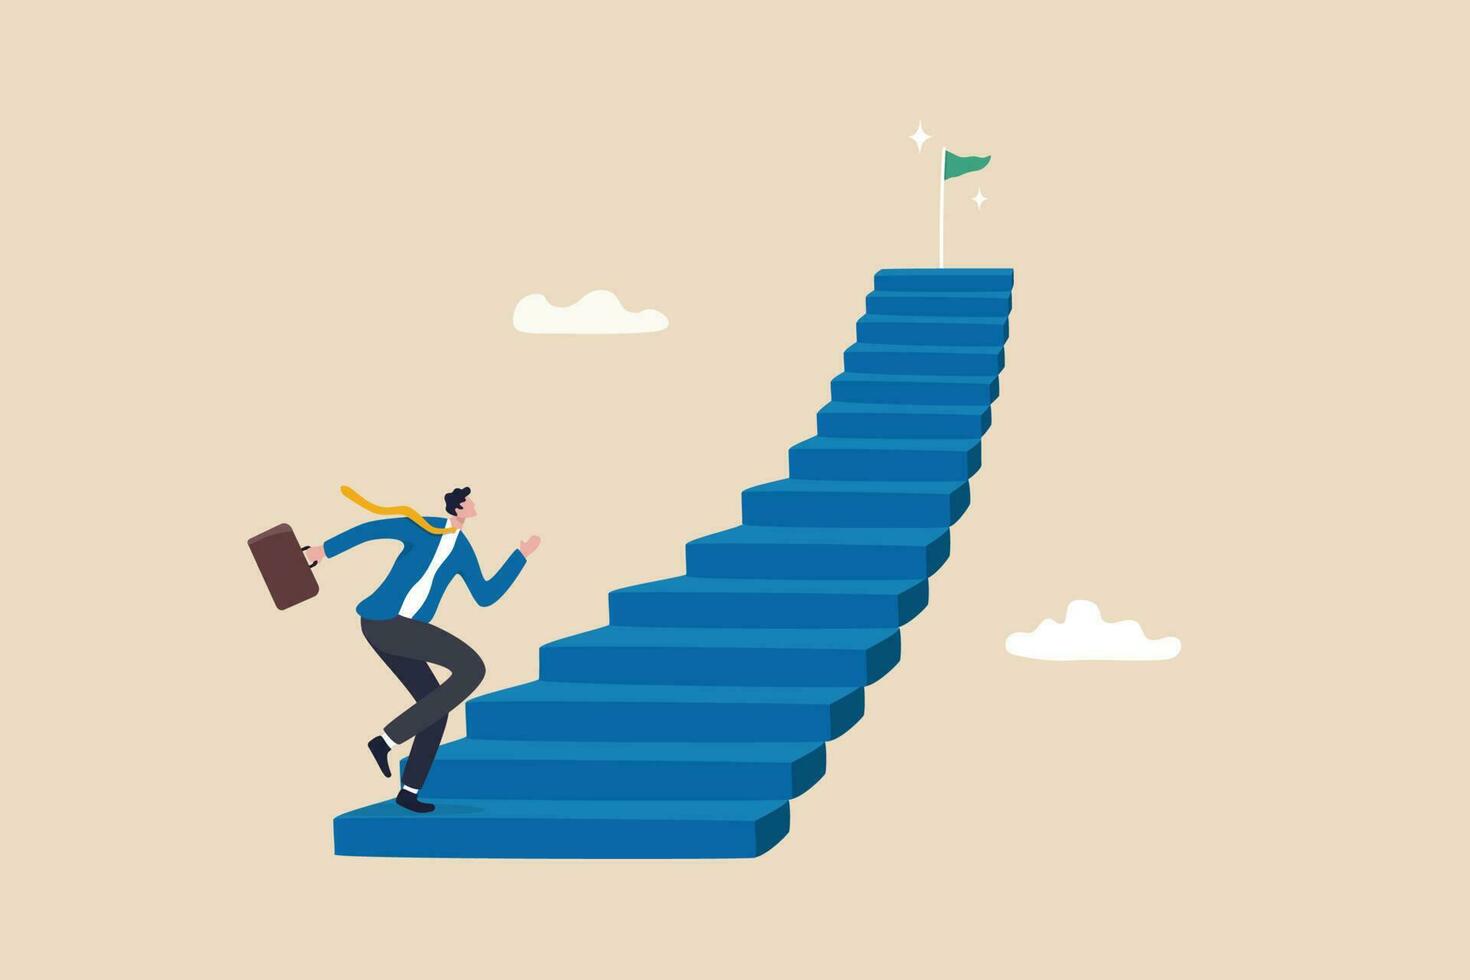 Stair to success, career path or step to achieve business target, ladder of success, improvement or challenge to reach goal, growth or ambition concept, businessman running up stair to reach goal. vector